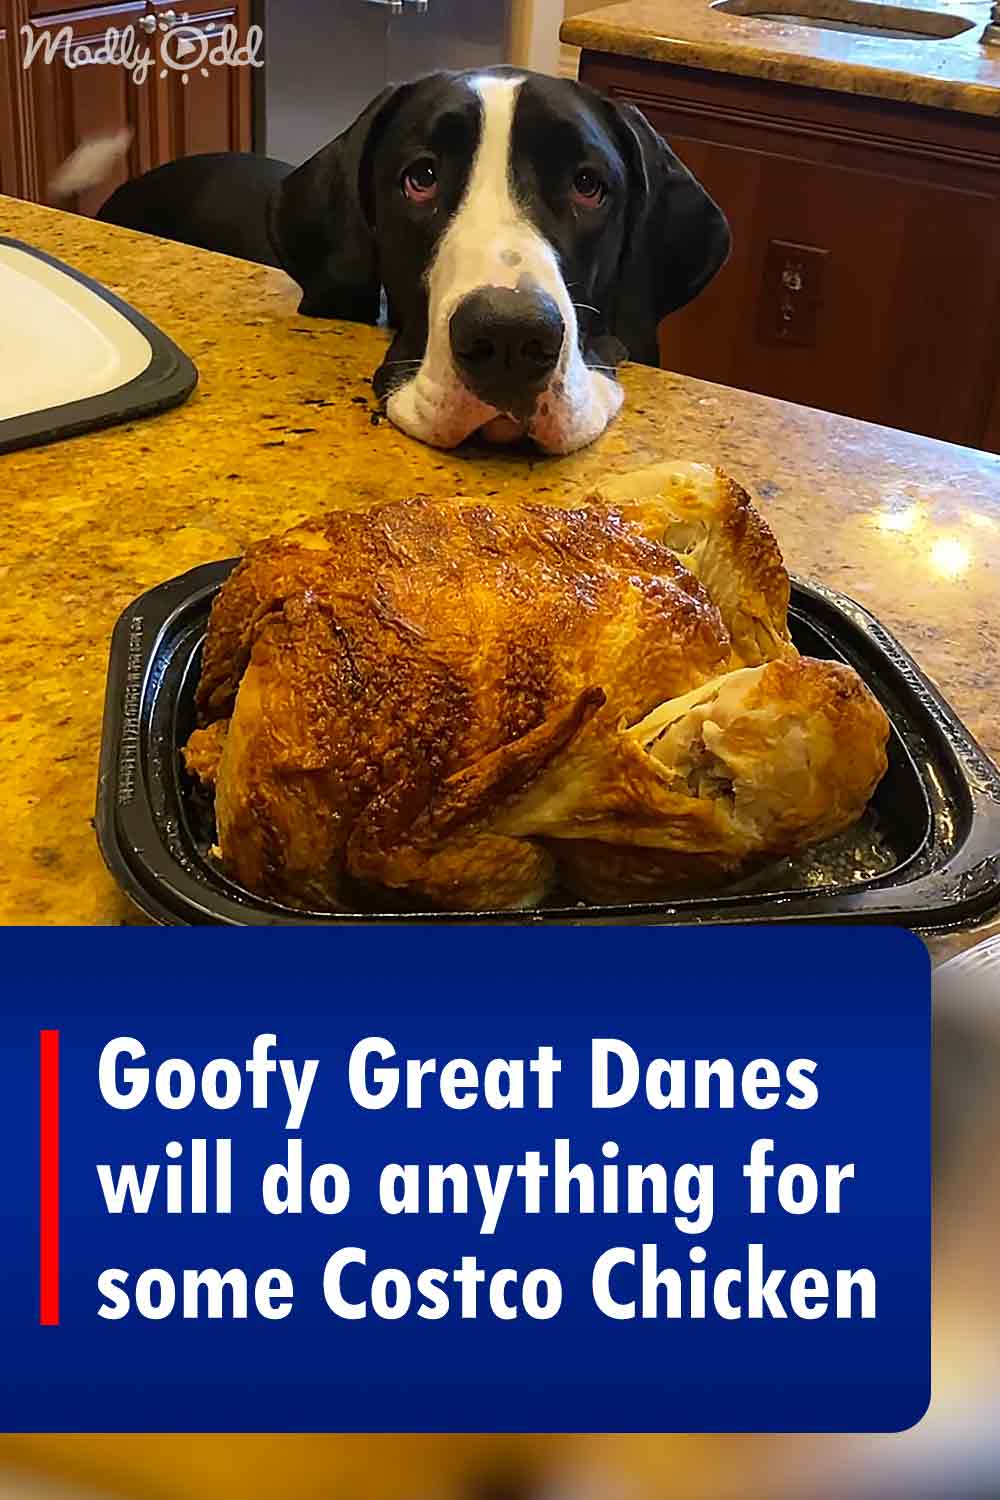 Goofy Great Danes will do anything for some Costco Chicken